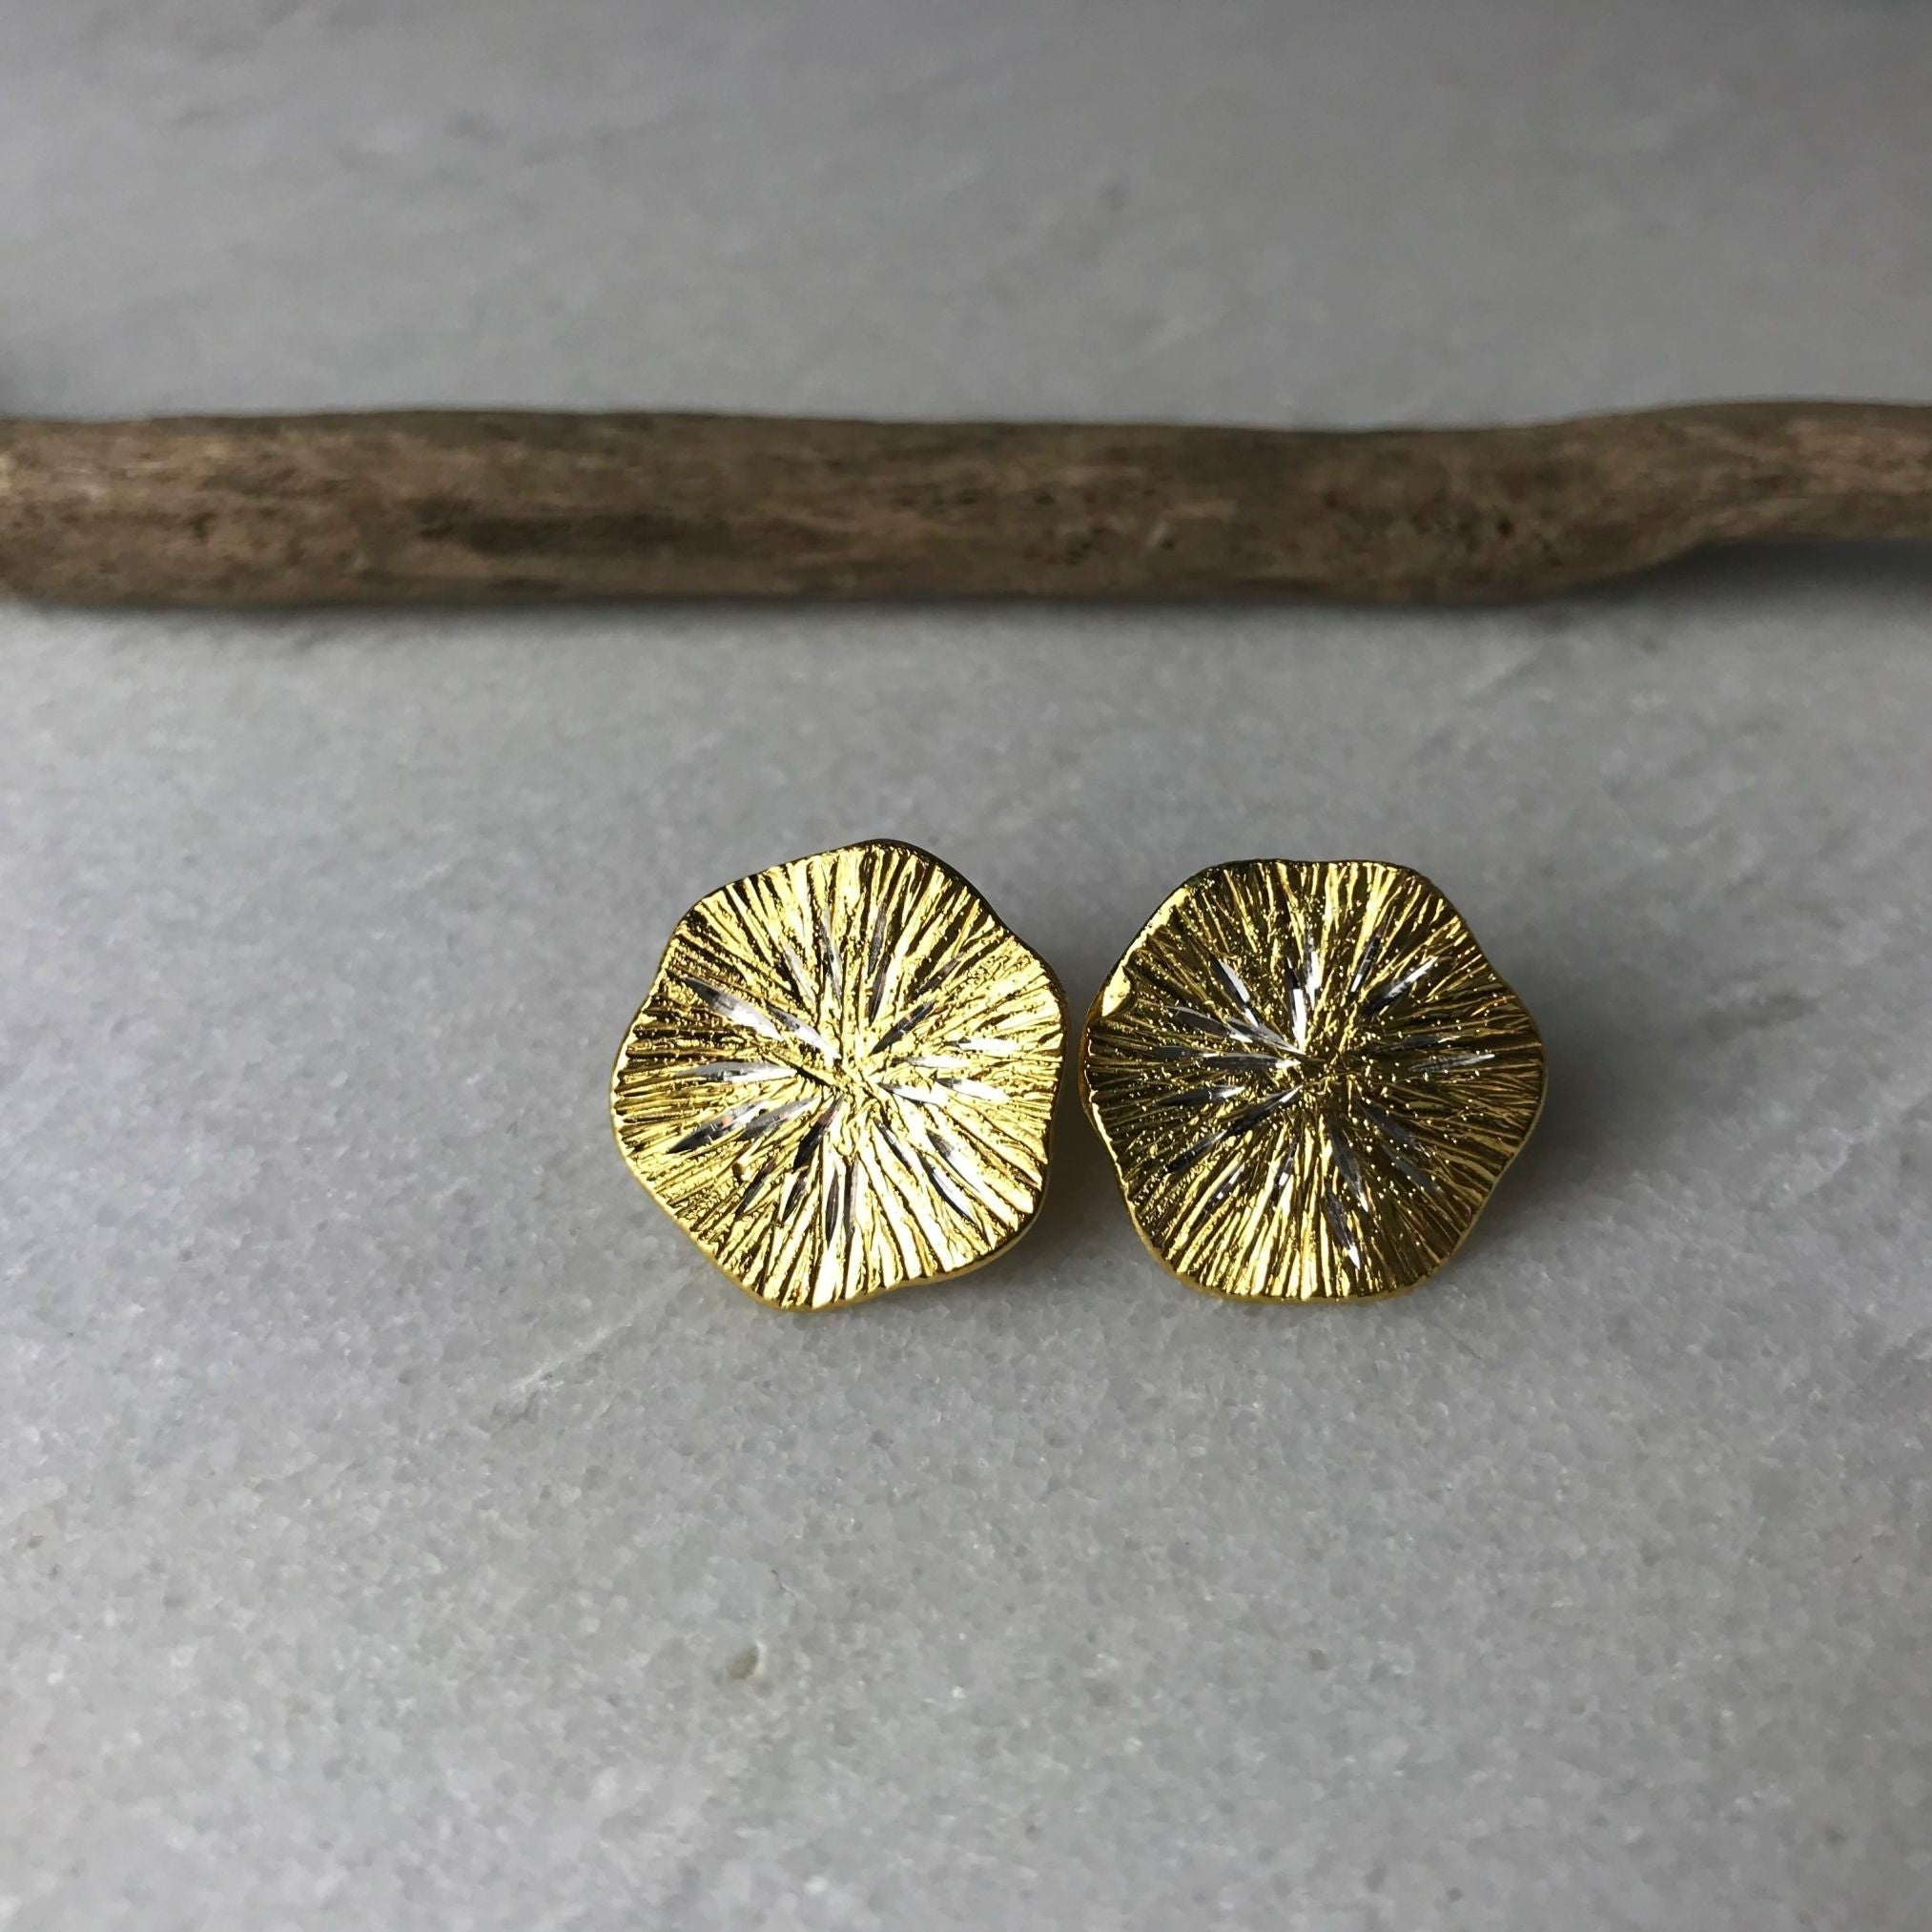 Gold Textured Disc Earrings - The Nancy Smillie Shop - Art, Jewellery & Designer Gifts Glasgow